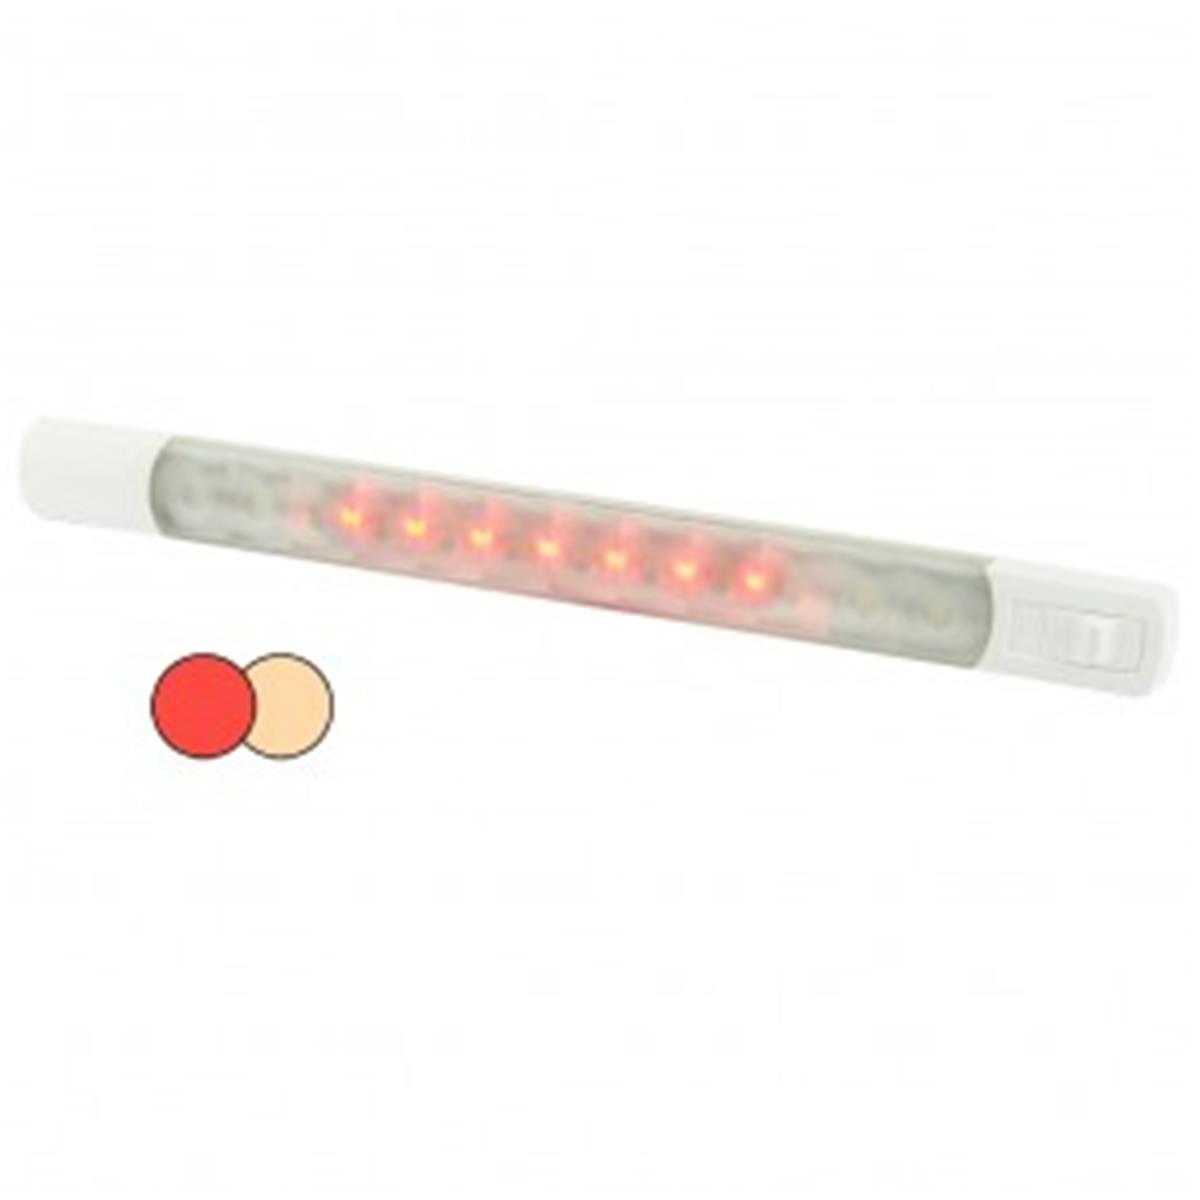 958121101 12 V Strip Light With Switch Warm White & Red Led